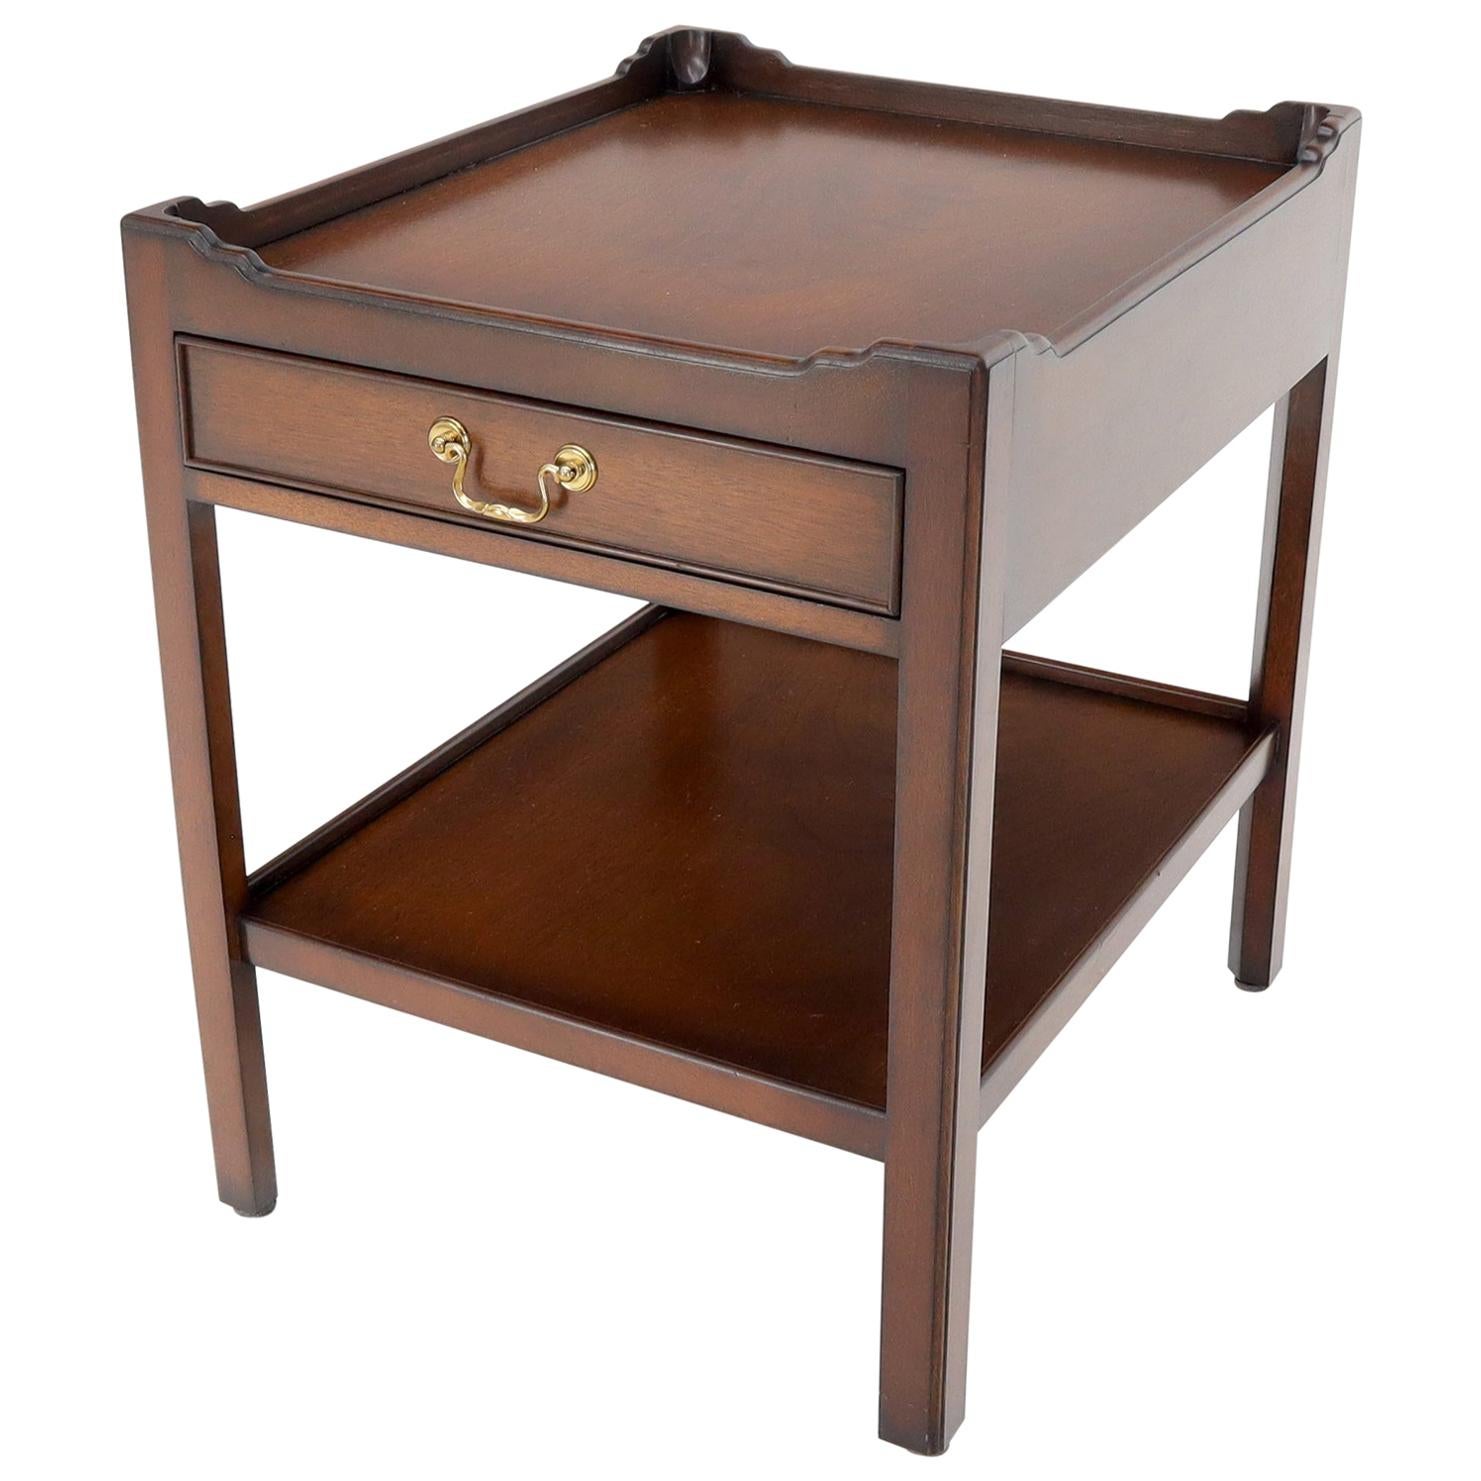 Southampton Mahogany Gallery Top Brass Drop Pull One-Drawer End Table Stand